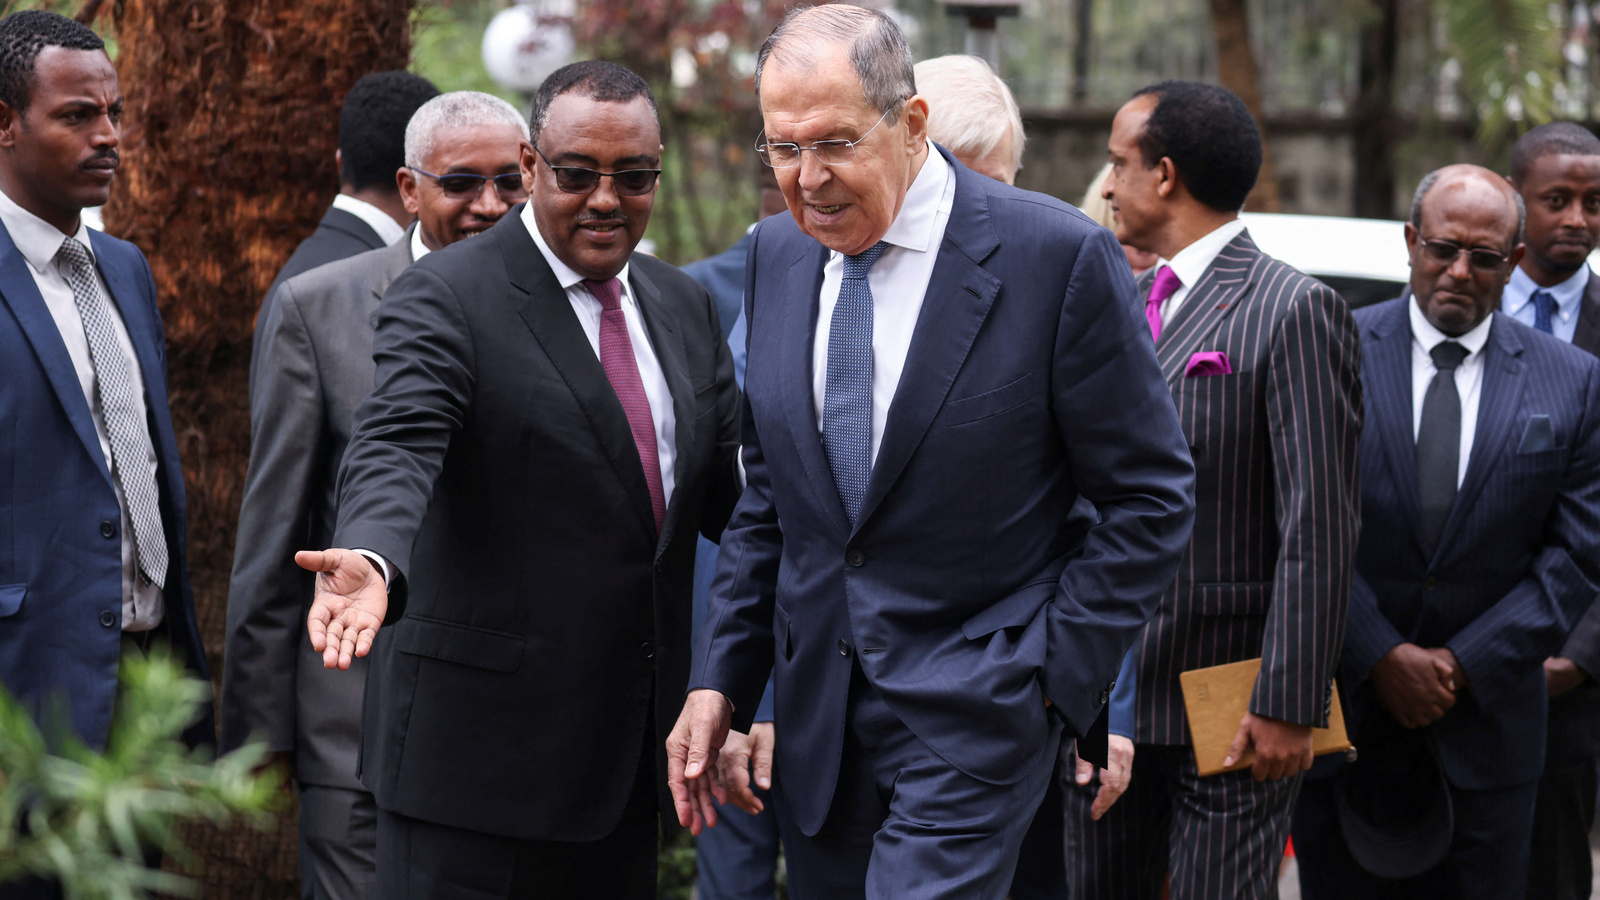 As Russia and the United States Seek Influence in Africa, There Are Strategic Pitfalls